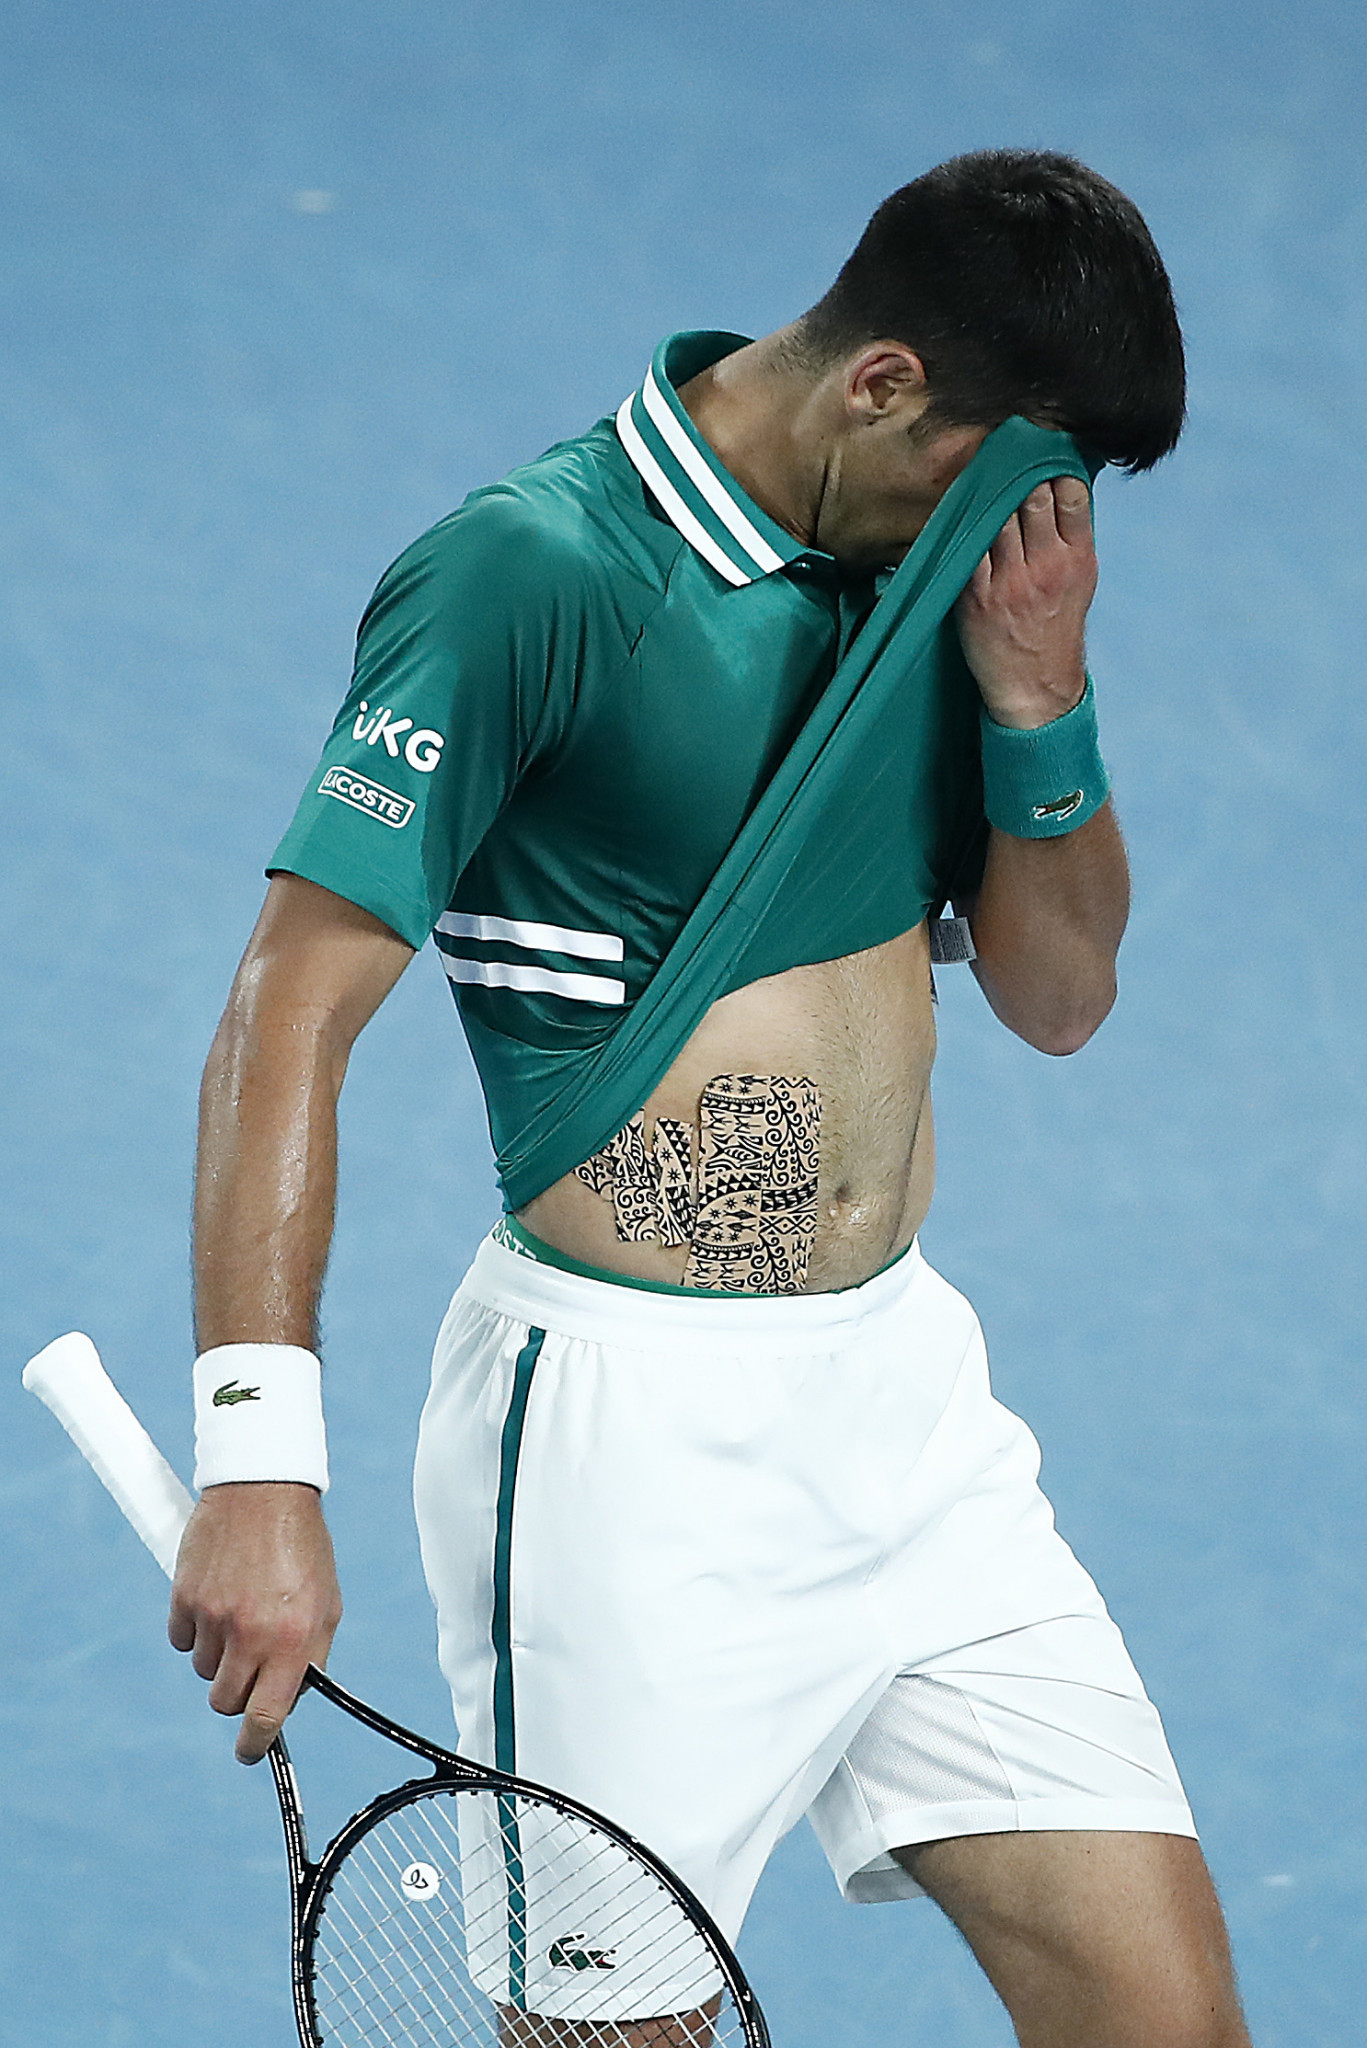 He did so despite struggling with a abdominal injury picked up in the third round ©Getty Images